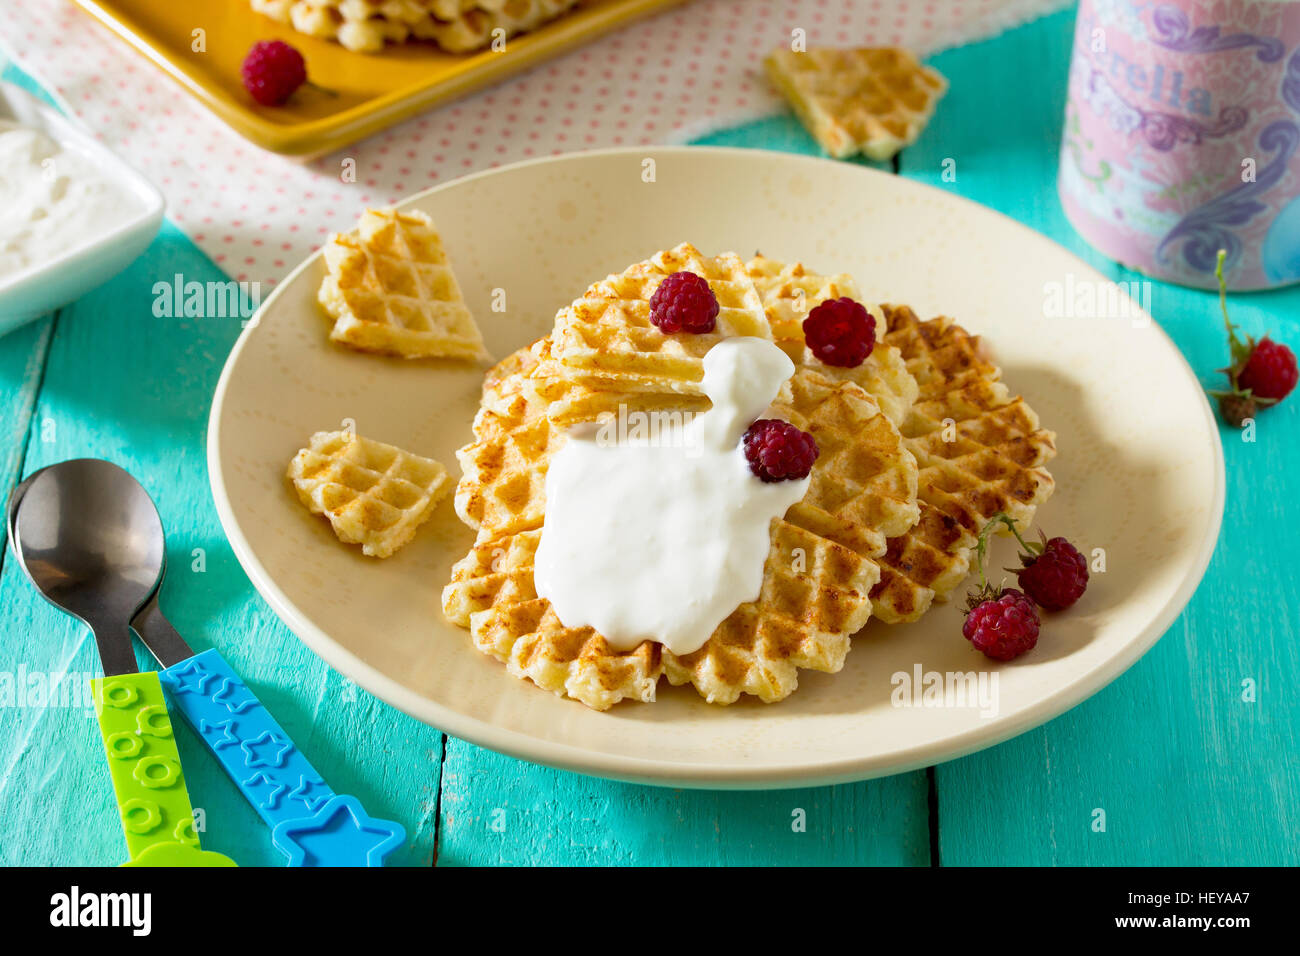 Dinner Or Lunch For Children Cakes And Fruit Waffles With